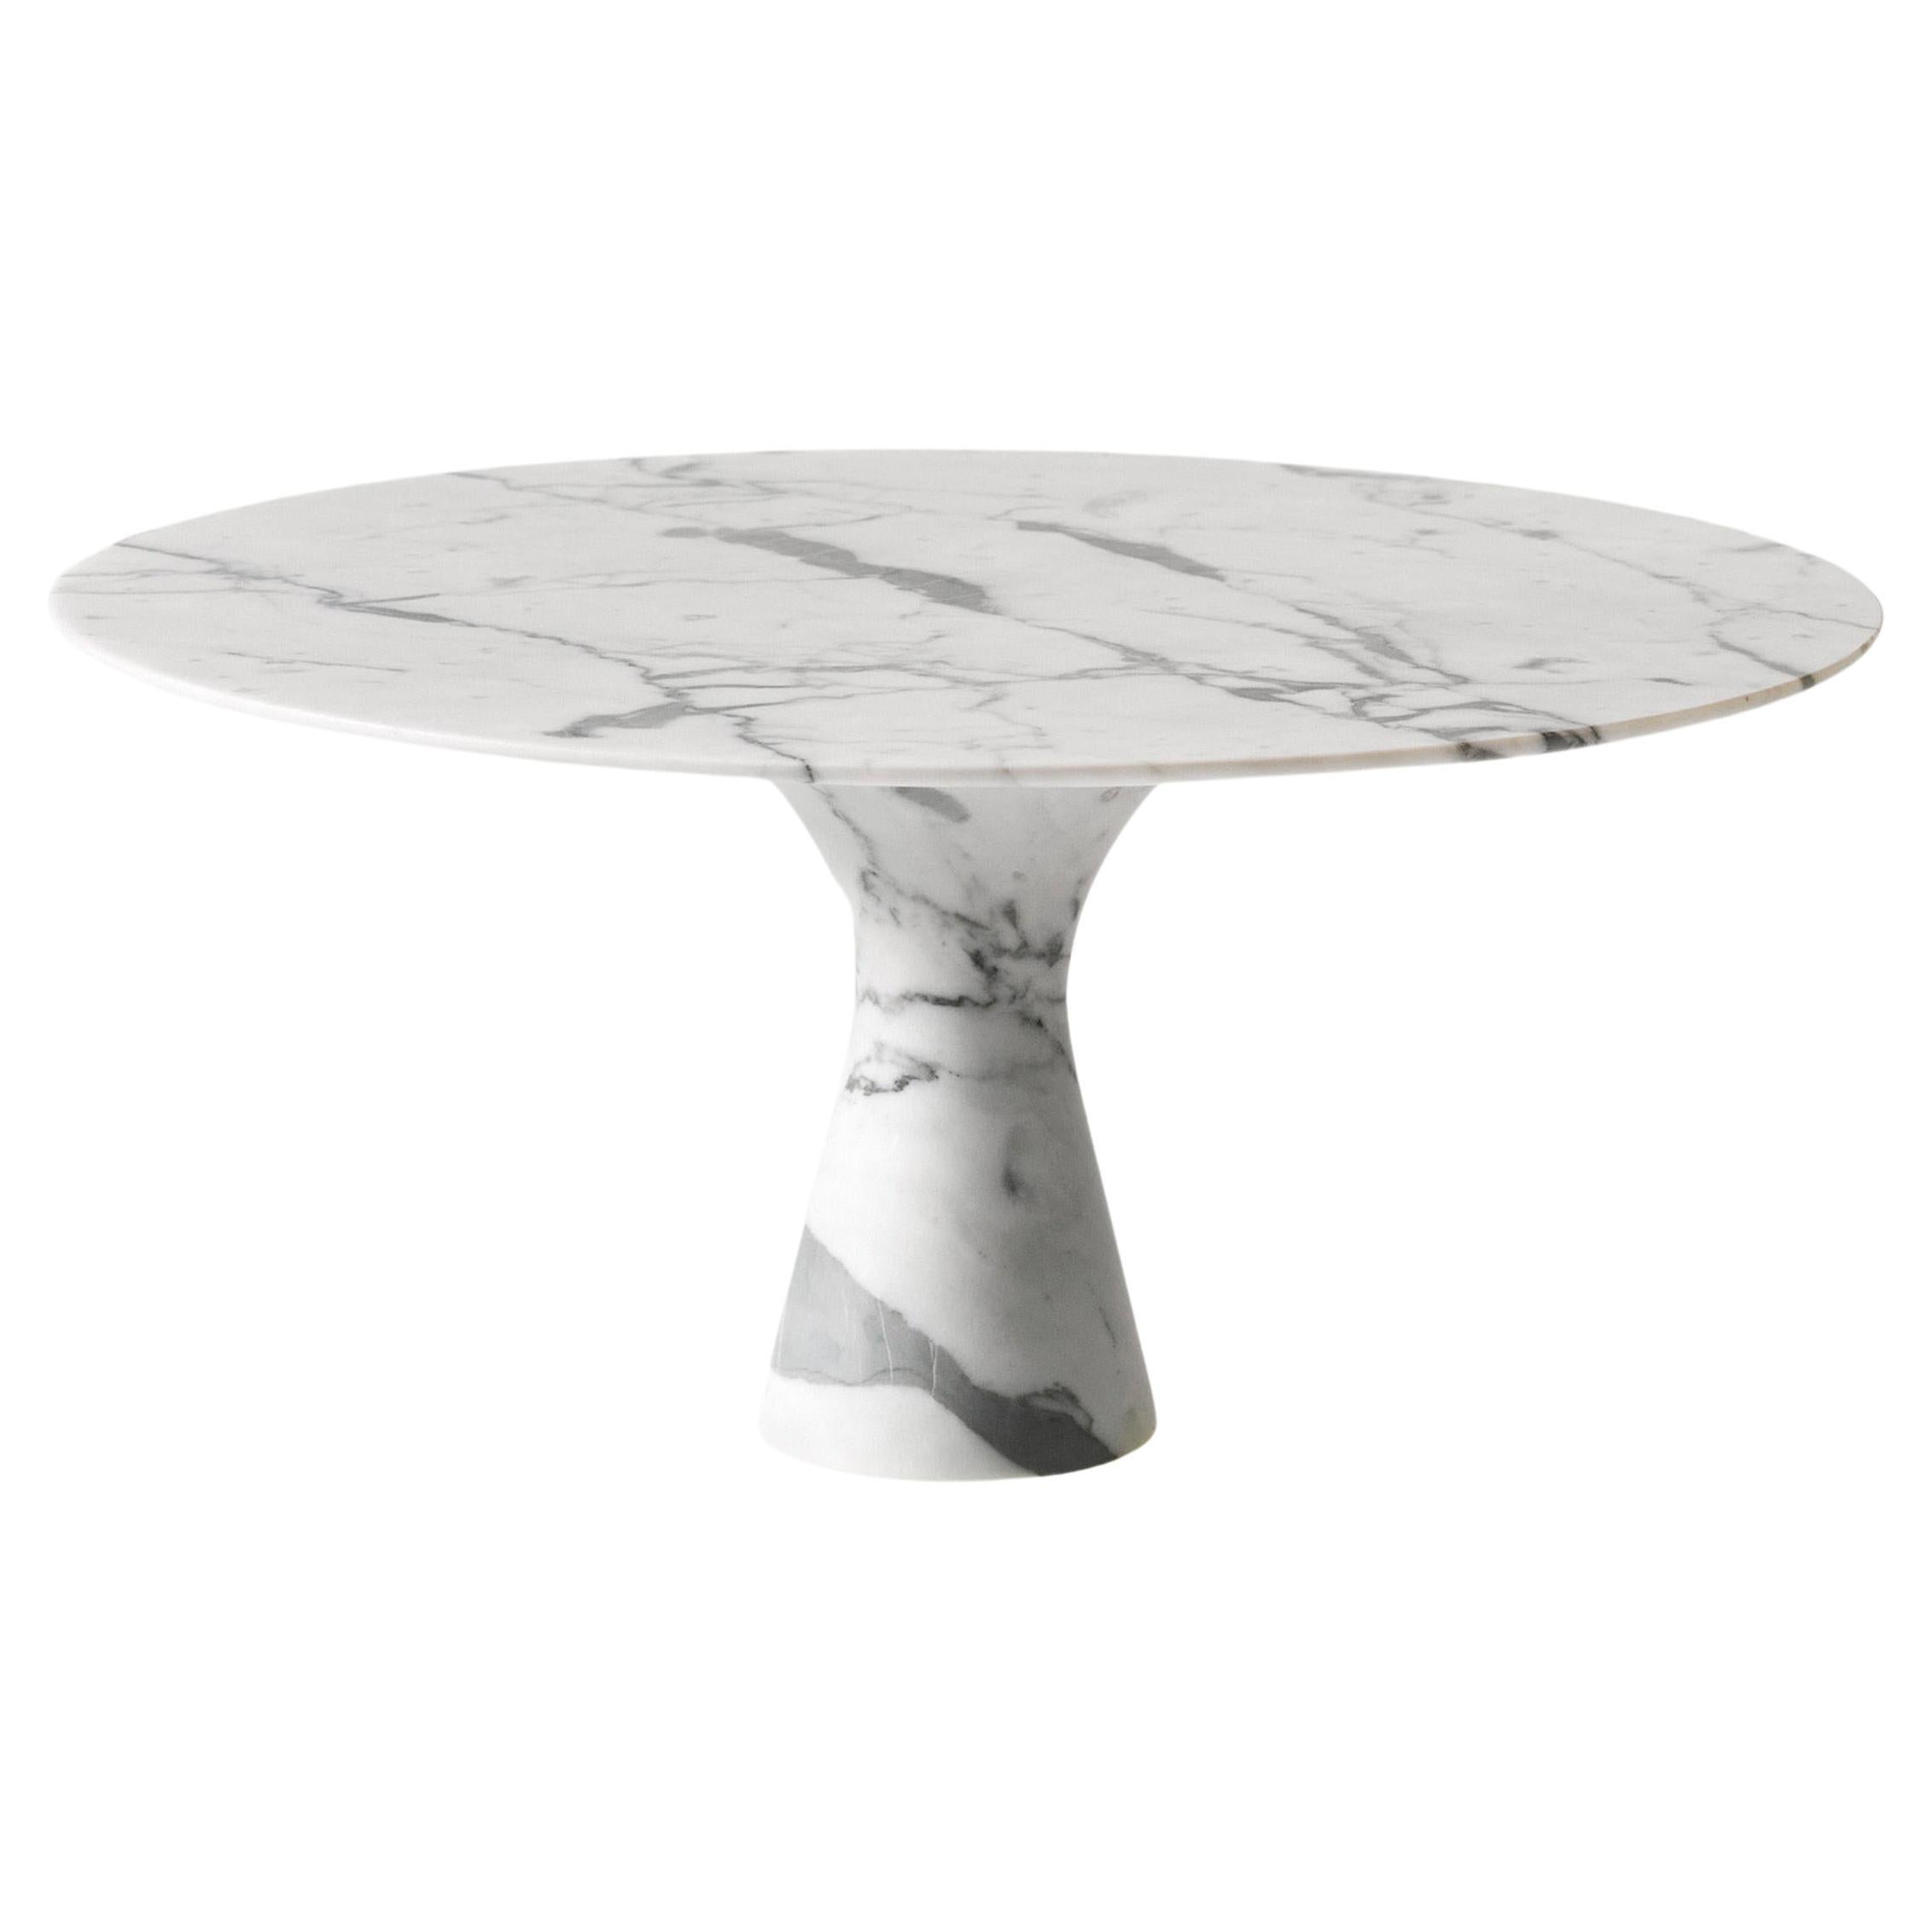 Bianco Statuarietto Refined Contemporary Marble Dining Table 180/75 For Sale